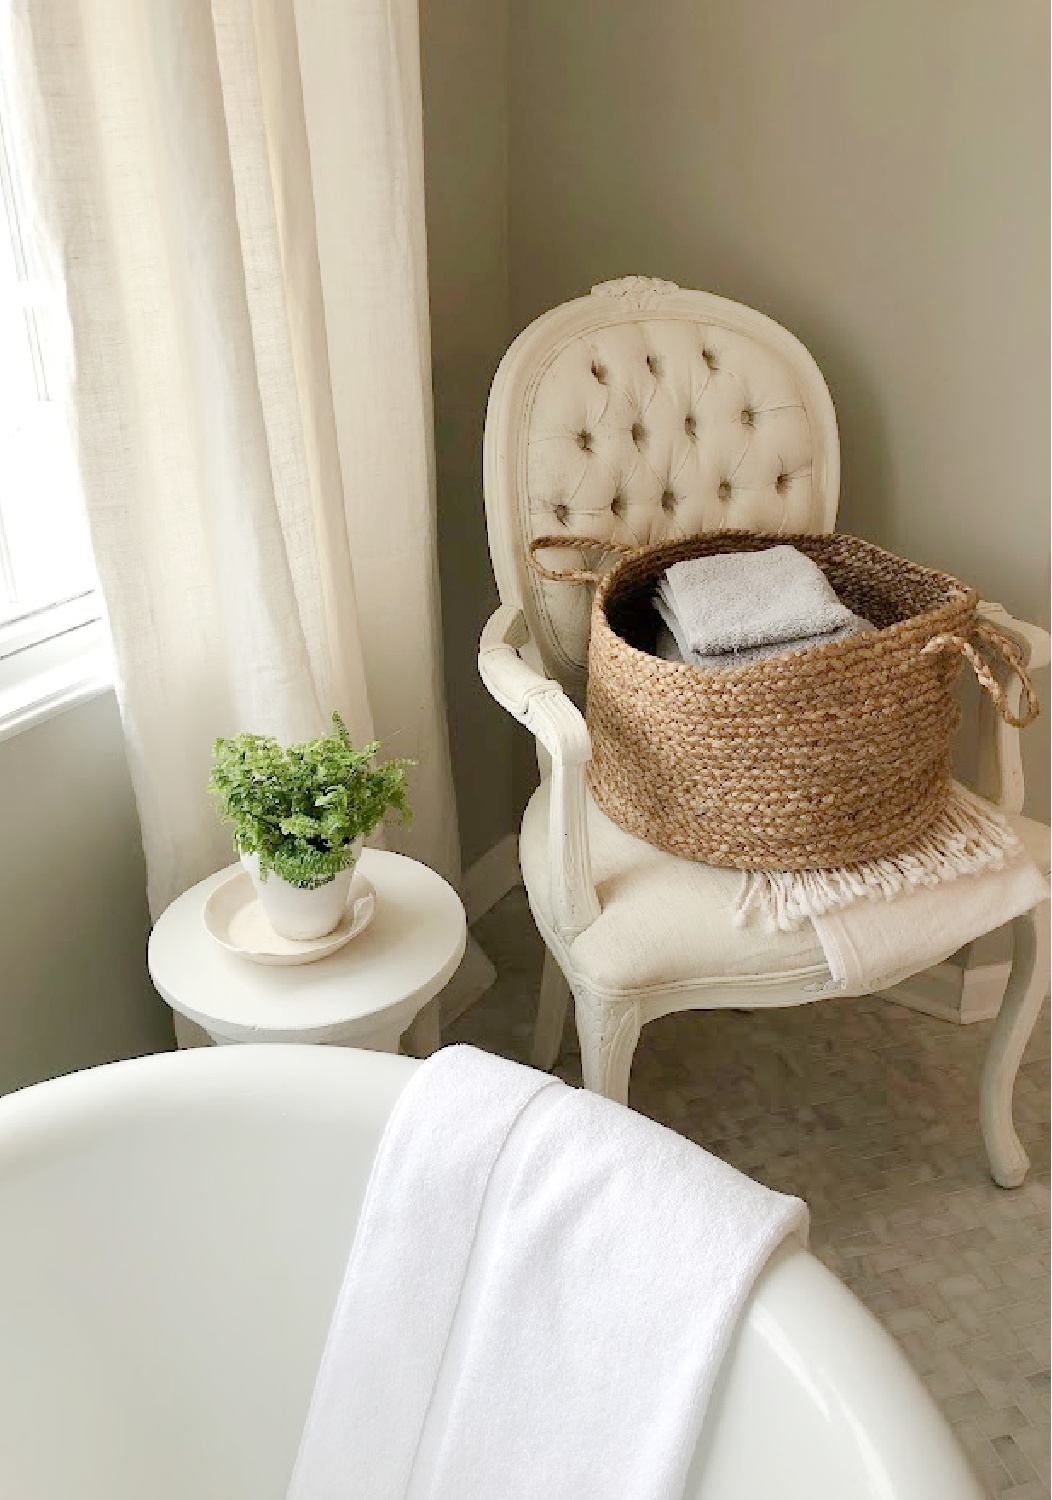 Modern French renovated bath with Louis style arm chair holding basket of towels, column side table with plant, and vintage clawfoot tub - Hello Lovely Studio. Walls are SW Repose Gray. #swreposegray